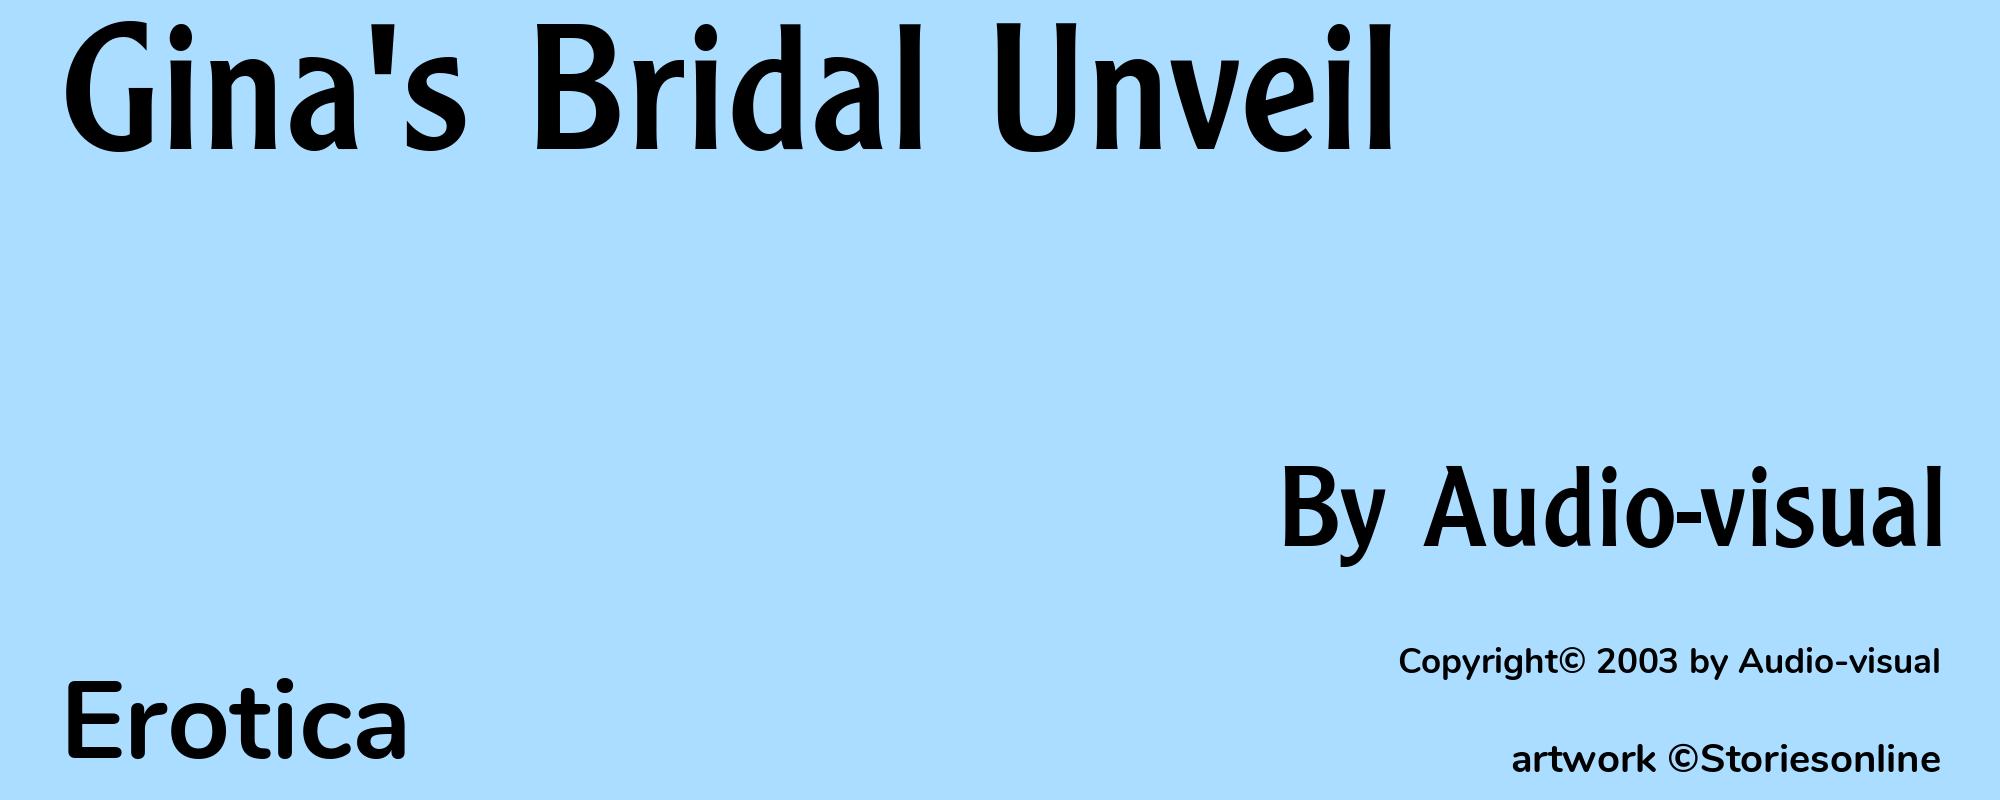 Gina's Bridal Unveil - Cover